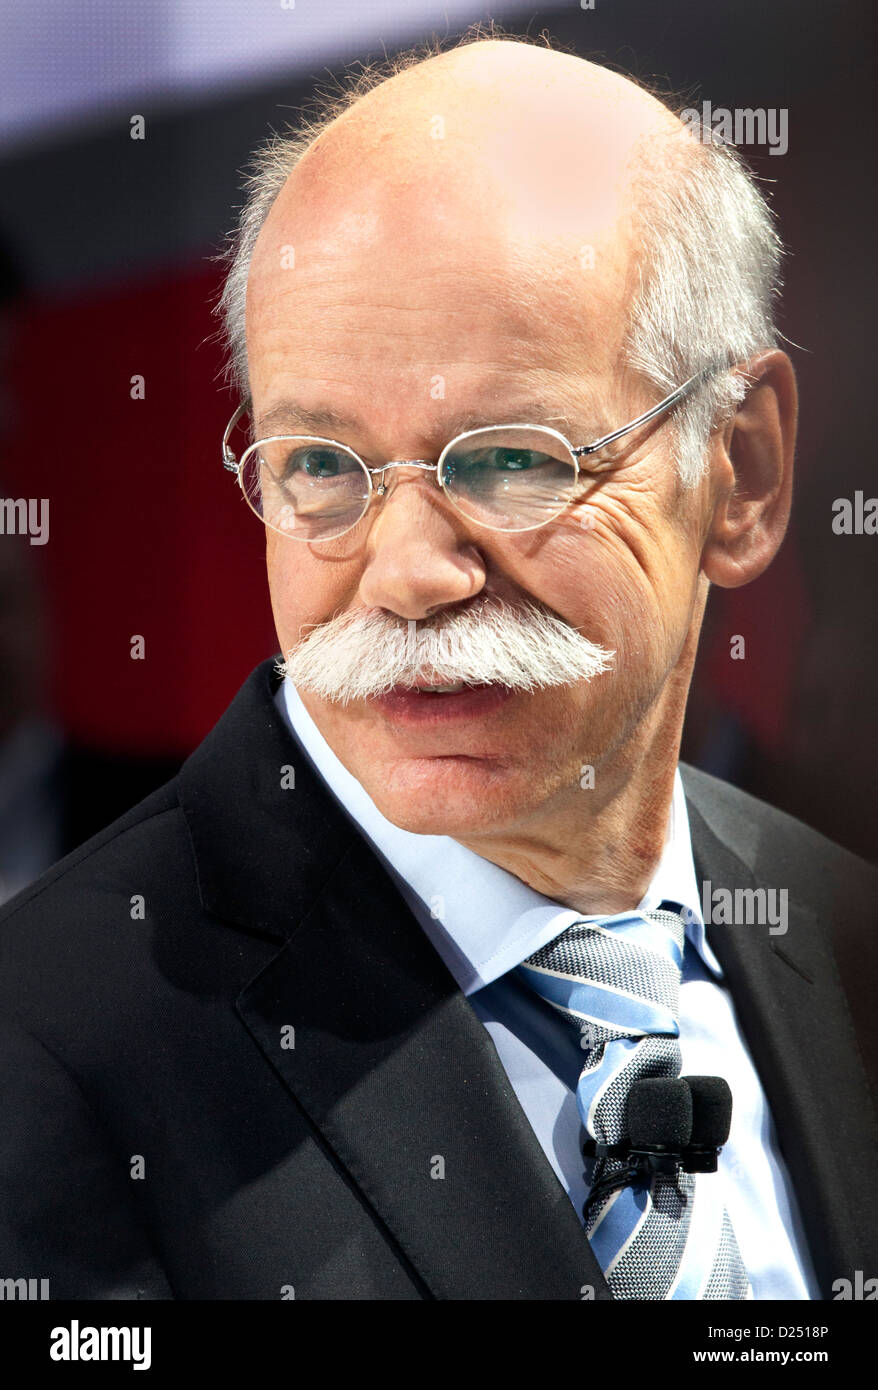 2013 North American International Auto Show, Detroit, Michigan. Dieter Zetsche, Daimler CEO and chair of Mercedes-Benz Cars Stock Photo